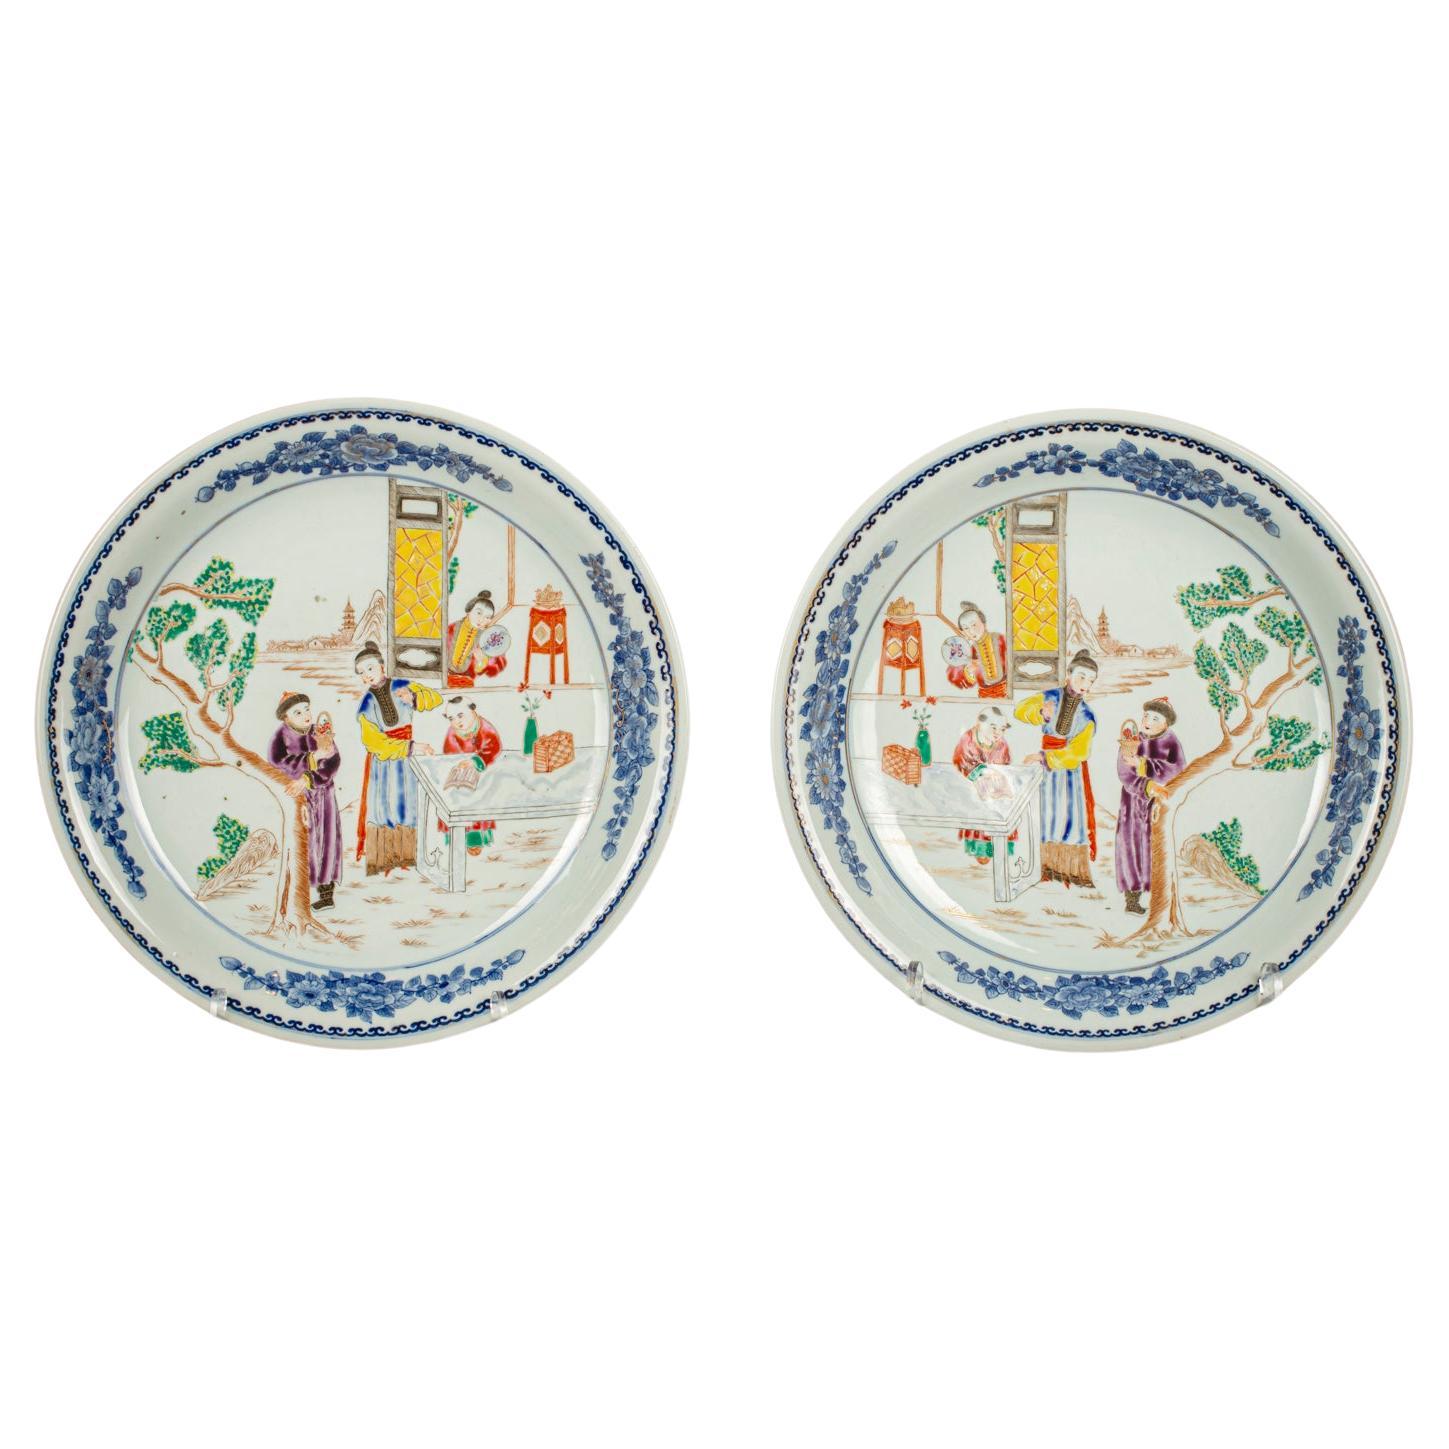 Pair of Chinese Porcelain Figural Chargers, Early 20th century